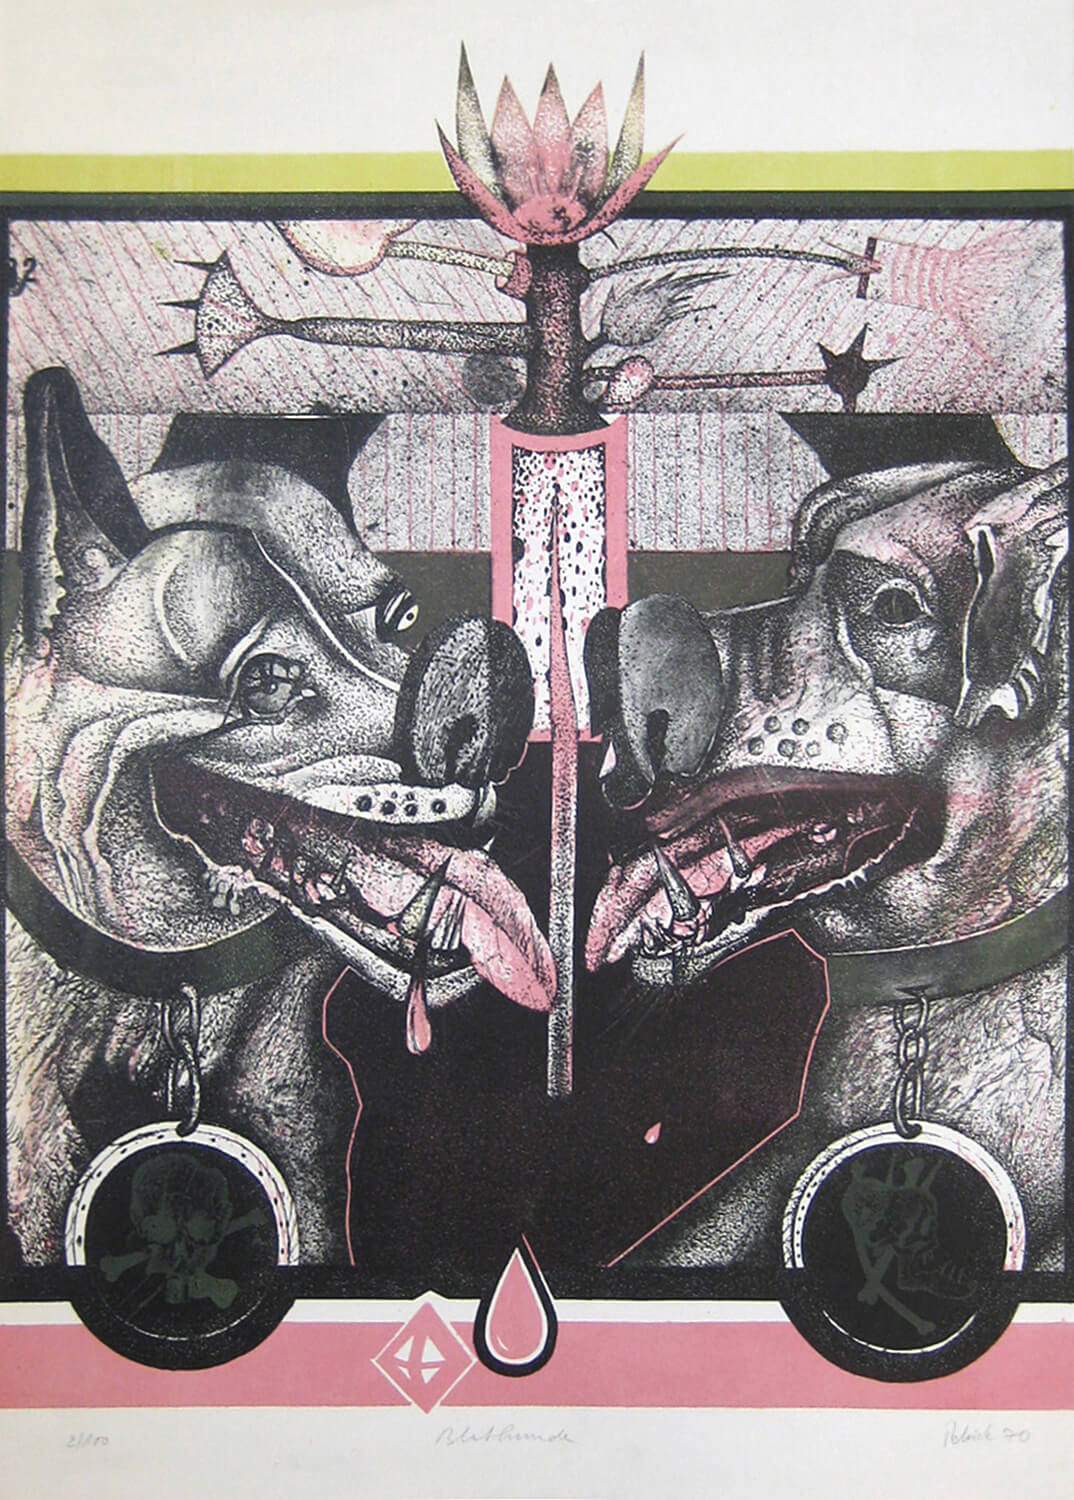 Wolfgang Petrick, Bluthunde, 1970, Lithographie, Auflage: 100, 73 x 52 cm